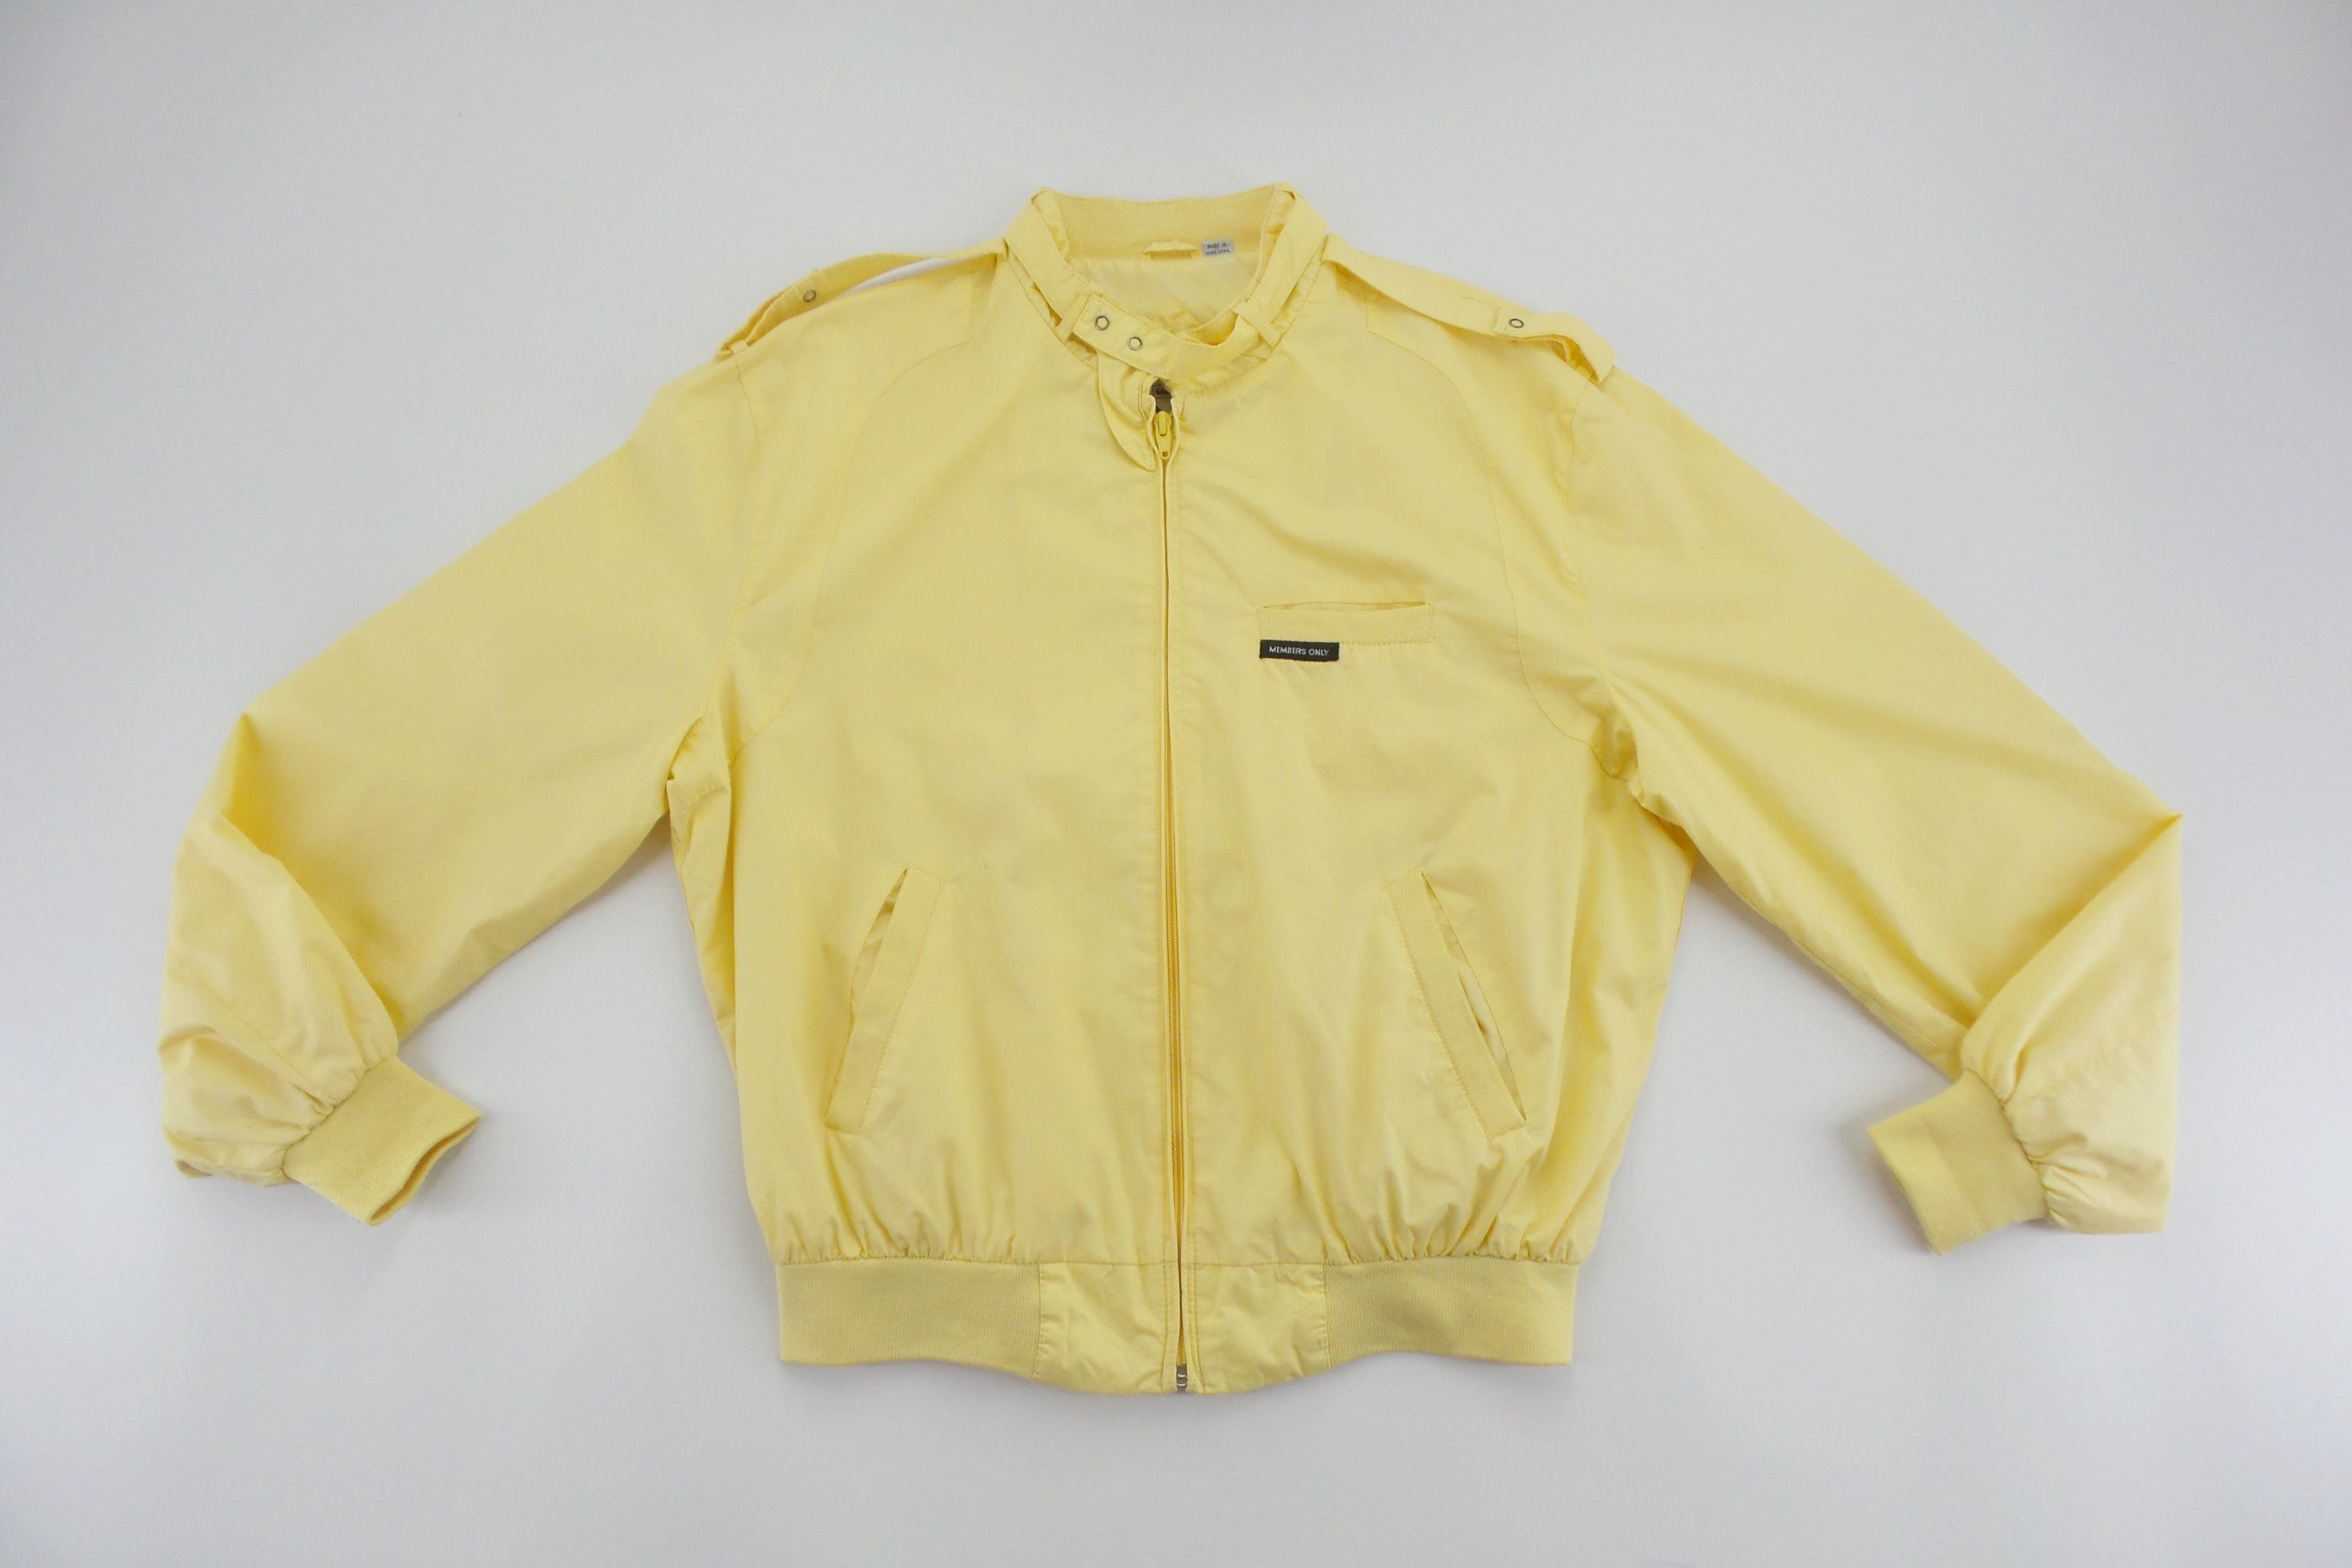 Members Only Members Only Racer 'Staff' Jackets | Grailed